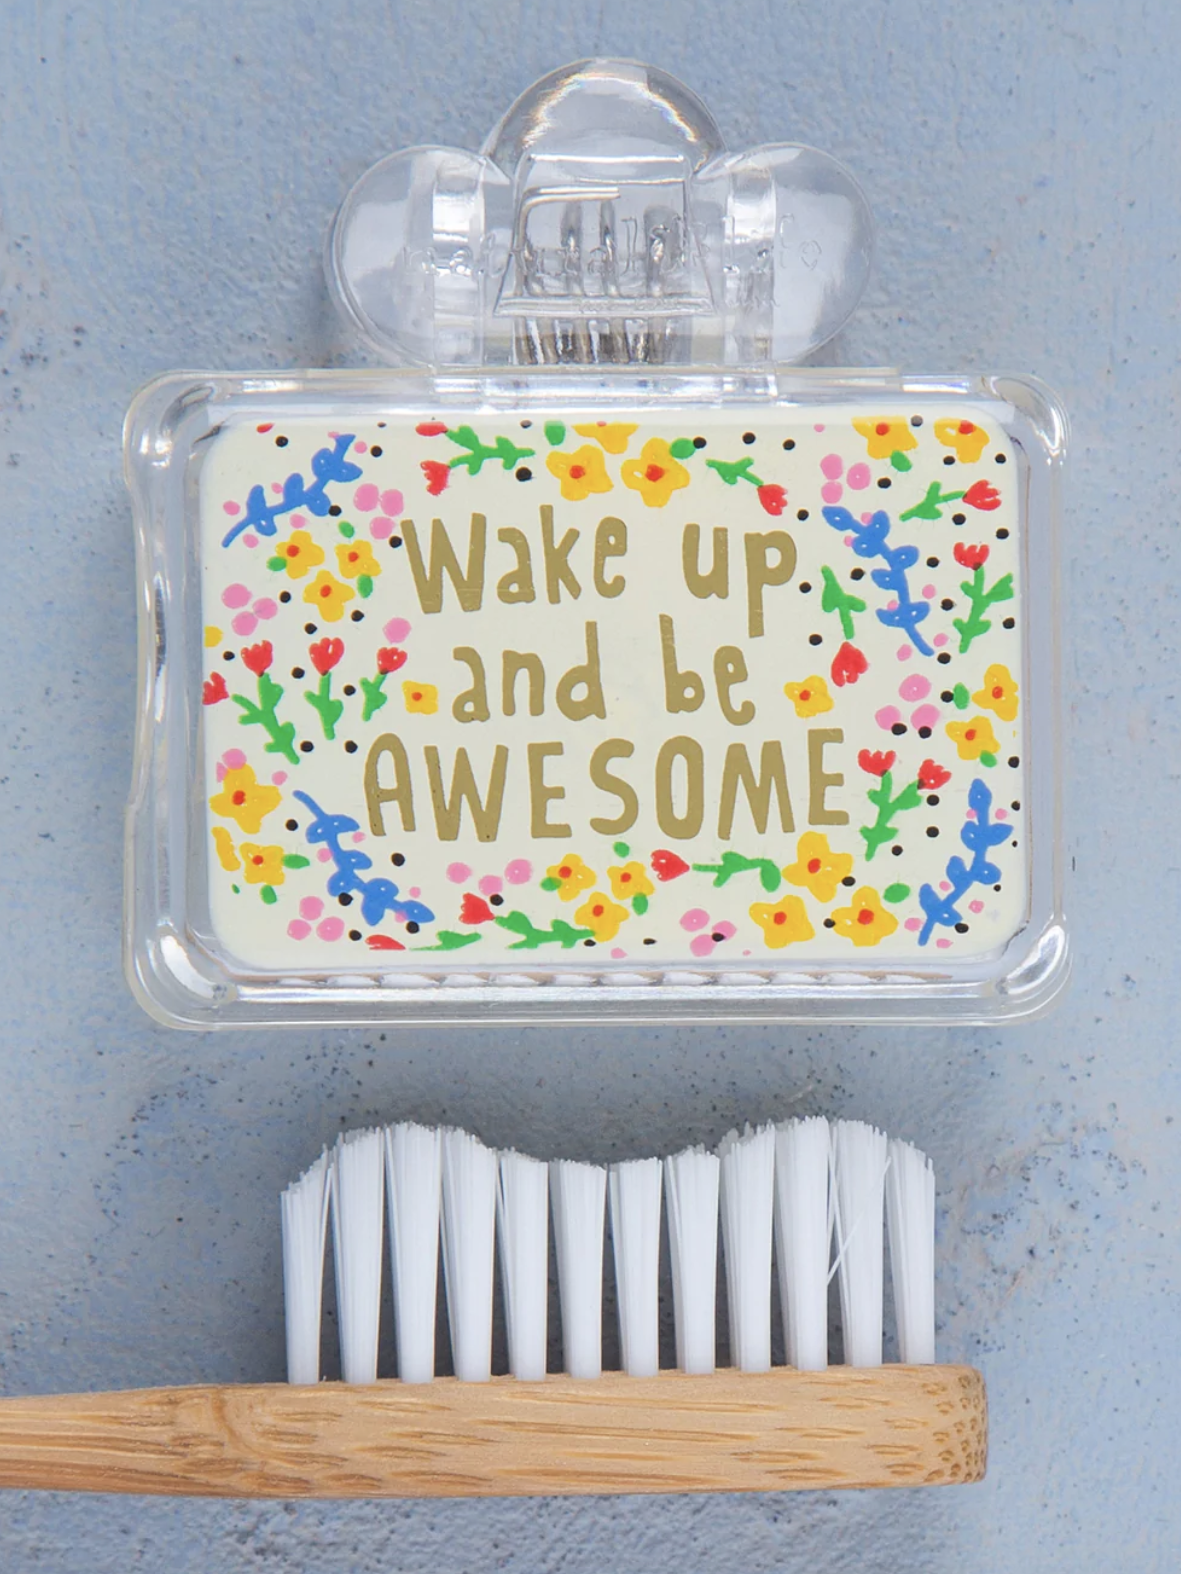 Wake Up And Be Awesome Tooth Brush Cover